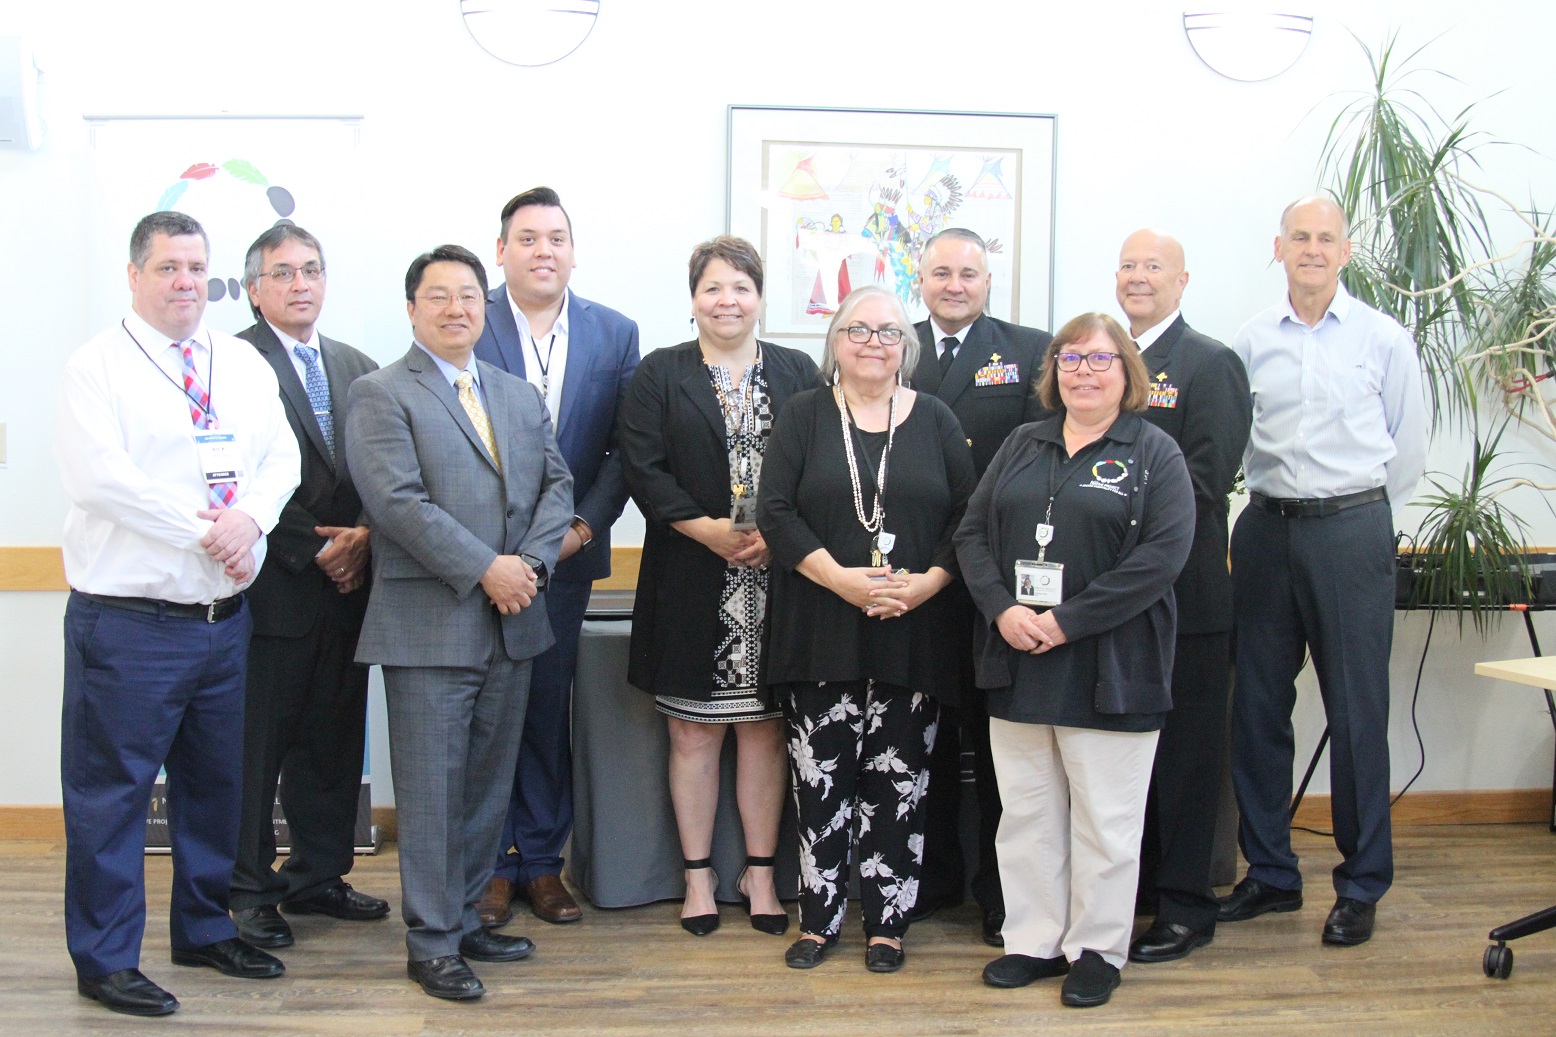 Principal Deputy Director Rear Adm. Weahkee and IHS representatives toured the NATIVE Project in Spokane, Wash. on June 11, 2019.